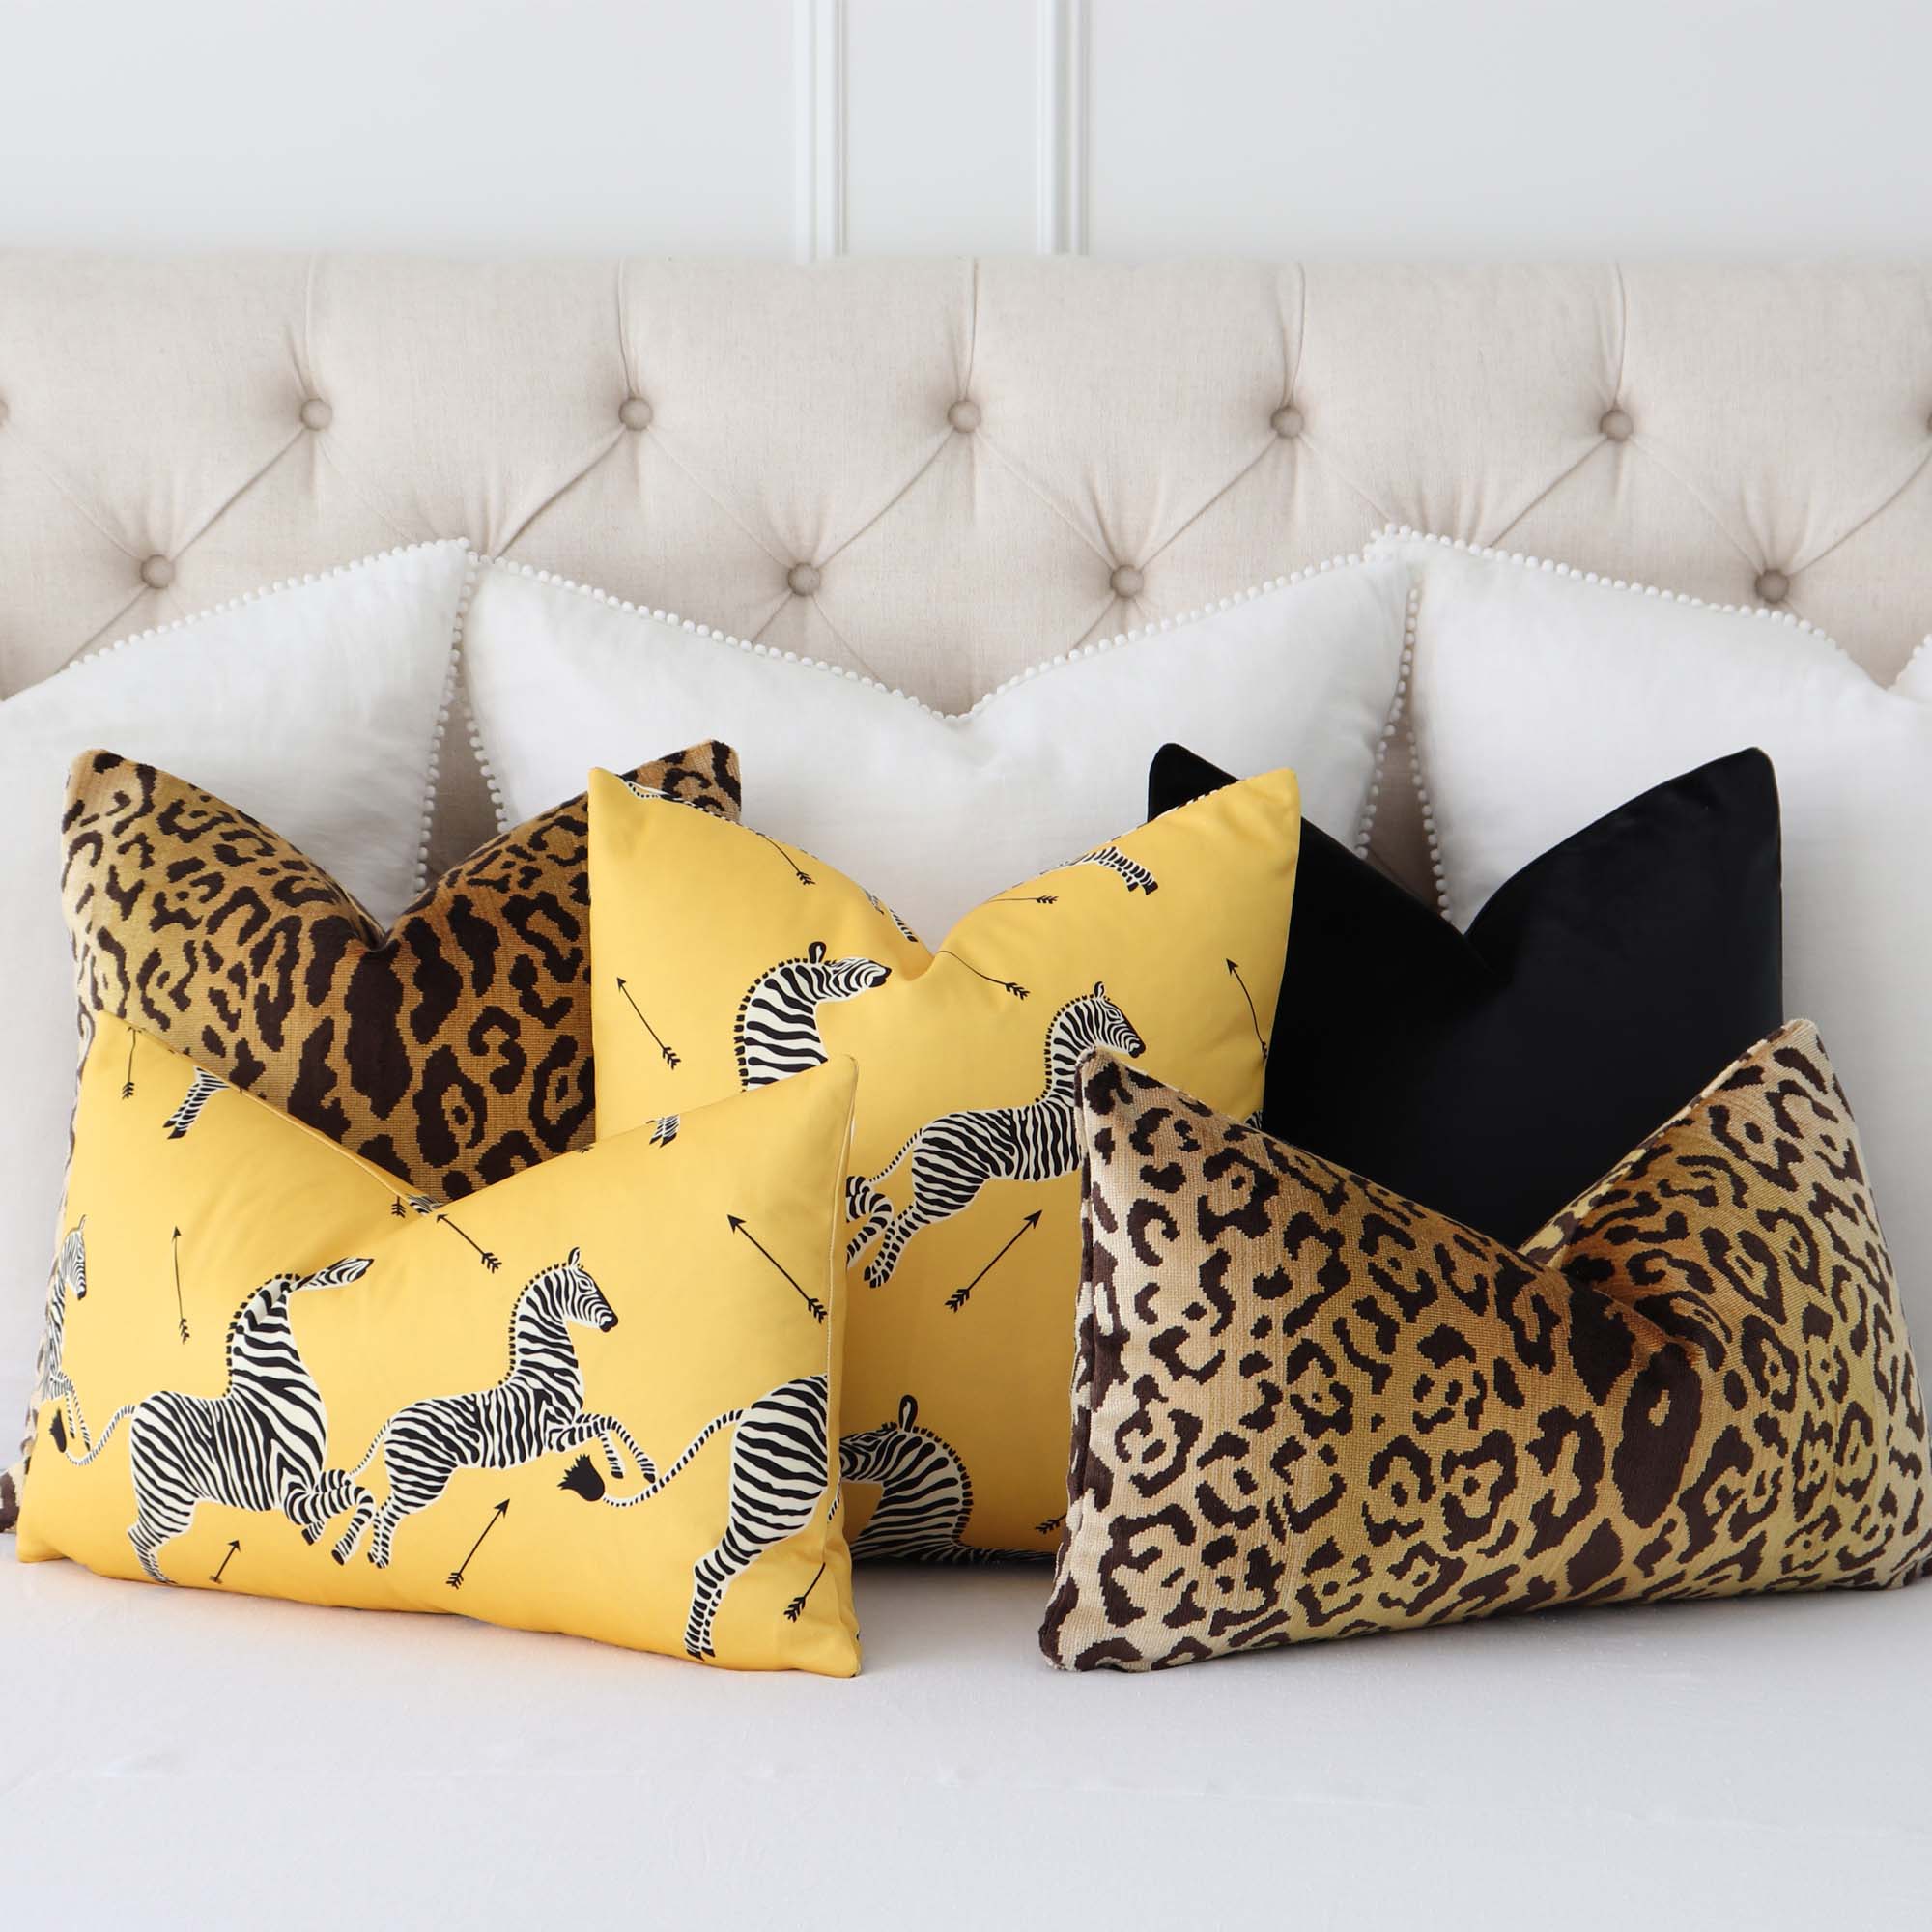 Scalamandre Zebras Petite Yellow Designer Animal Print Throw Pillow Cover with Coordinating Throw Pillows on Bed